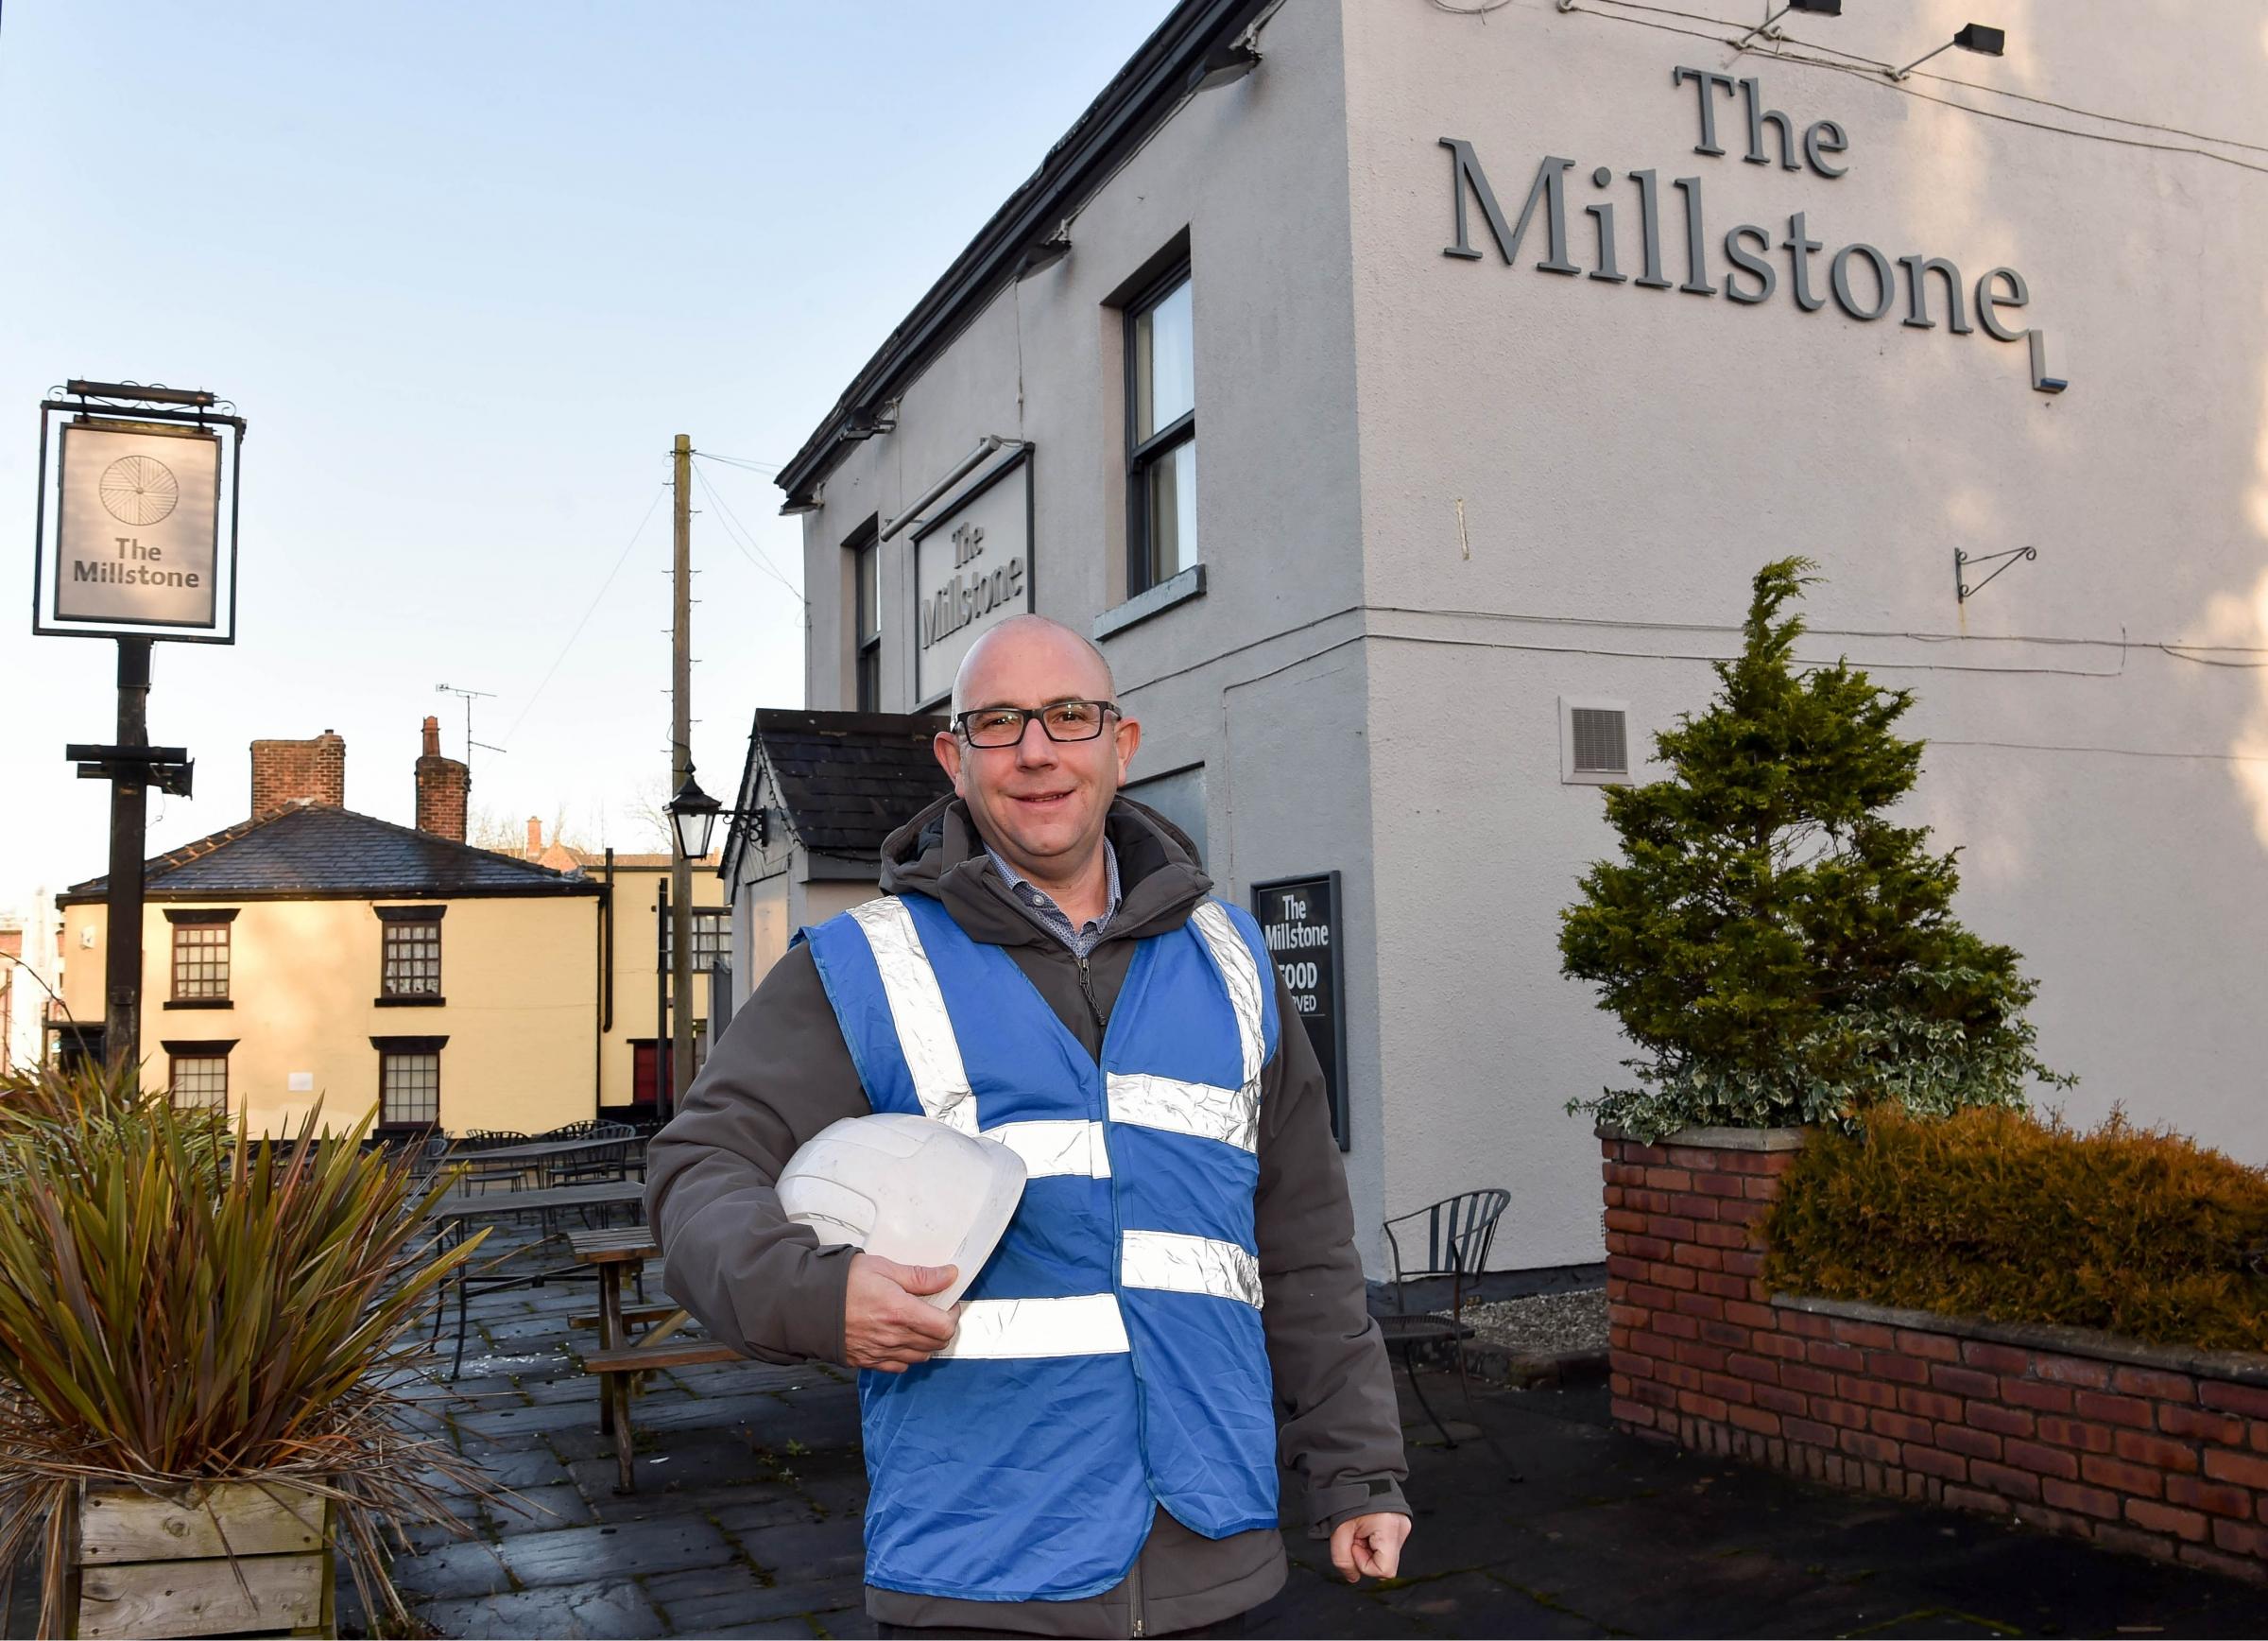 Star Pubs & Bars area manager David OBrien outside The Millstone